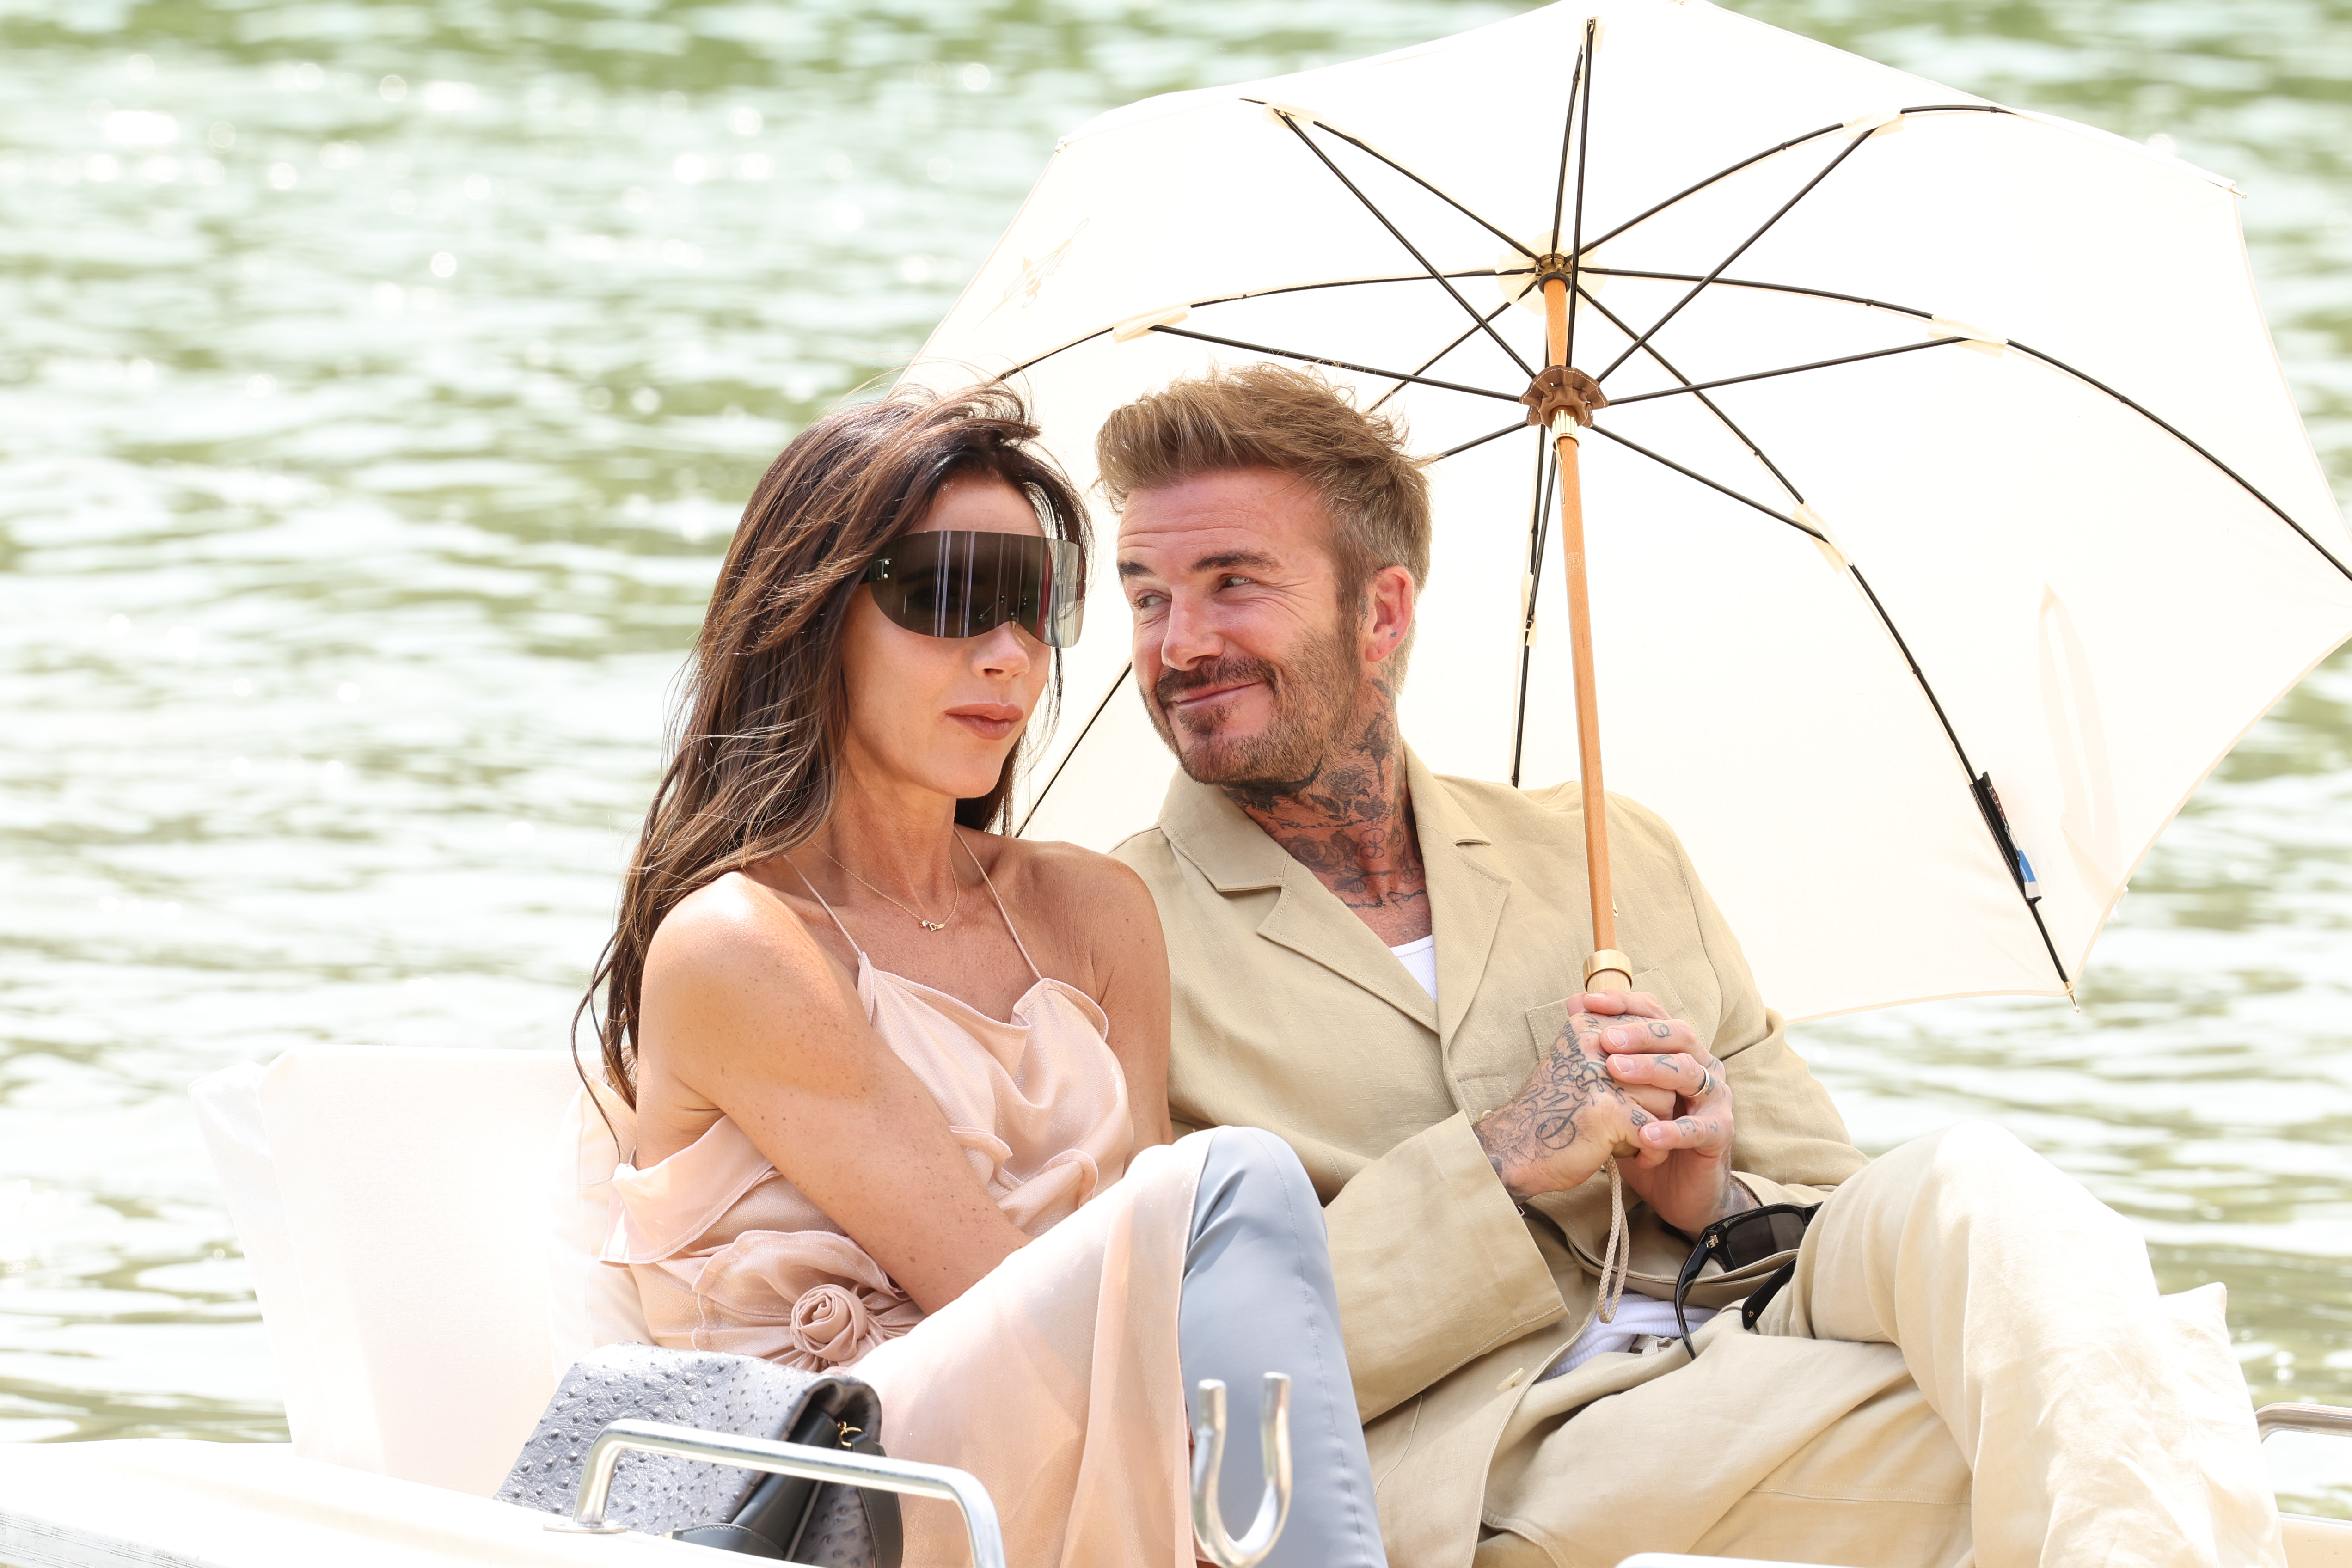 David Beckham Takes Style Cues from Wife Victoria